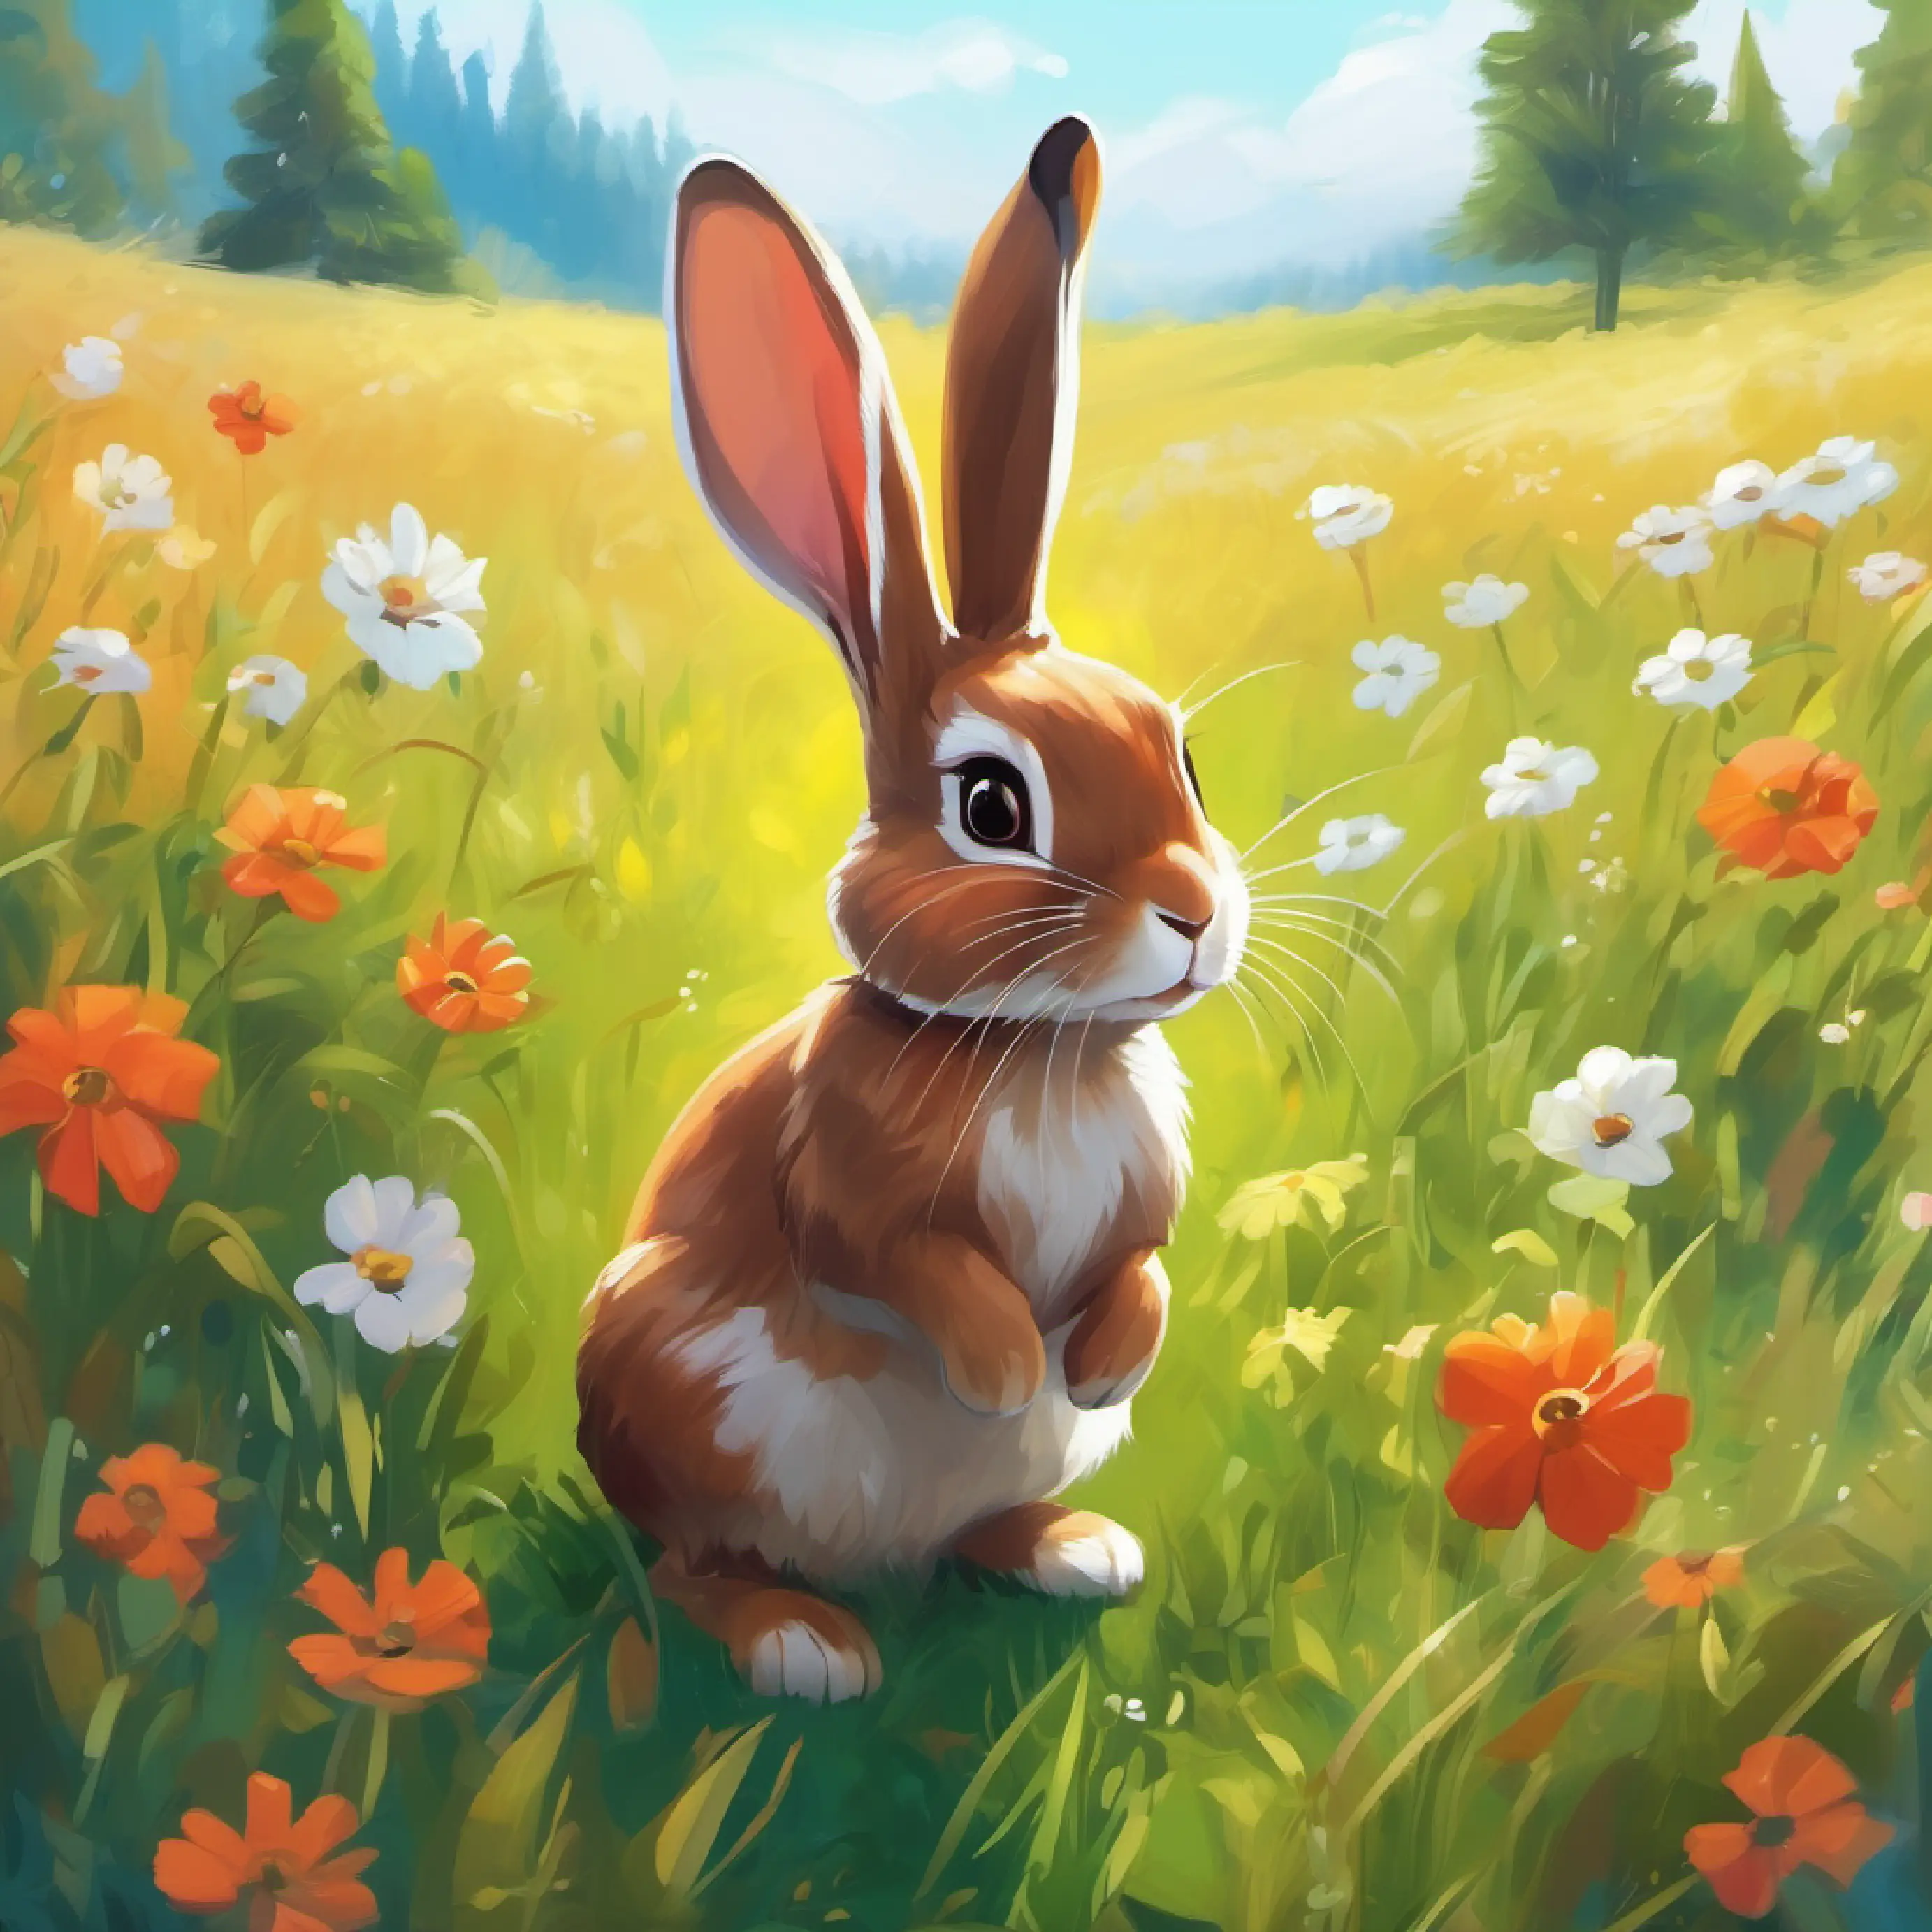 Introduces A brown rabbit with white paws and bright, anxious eyes in a meadow, feeling nervous.